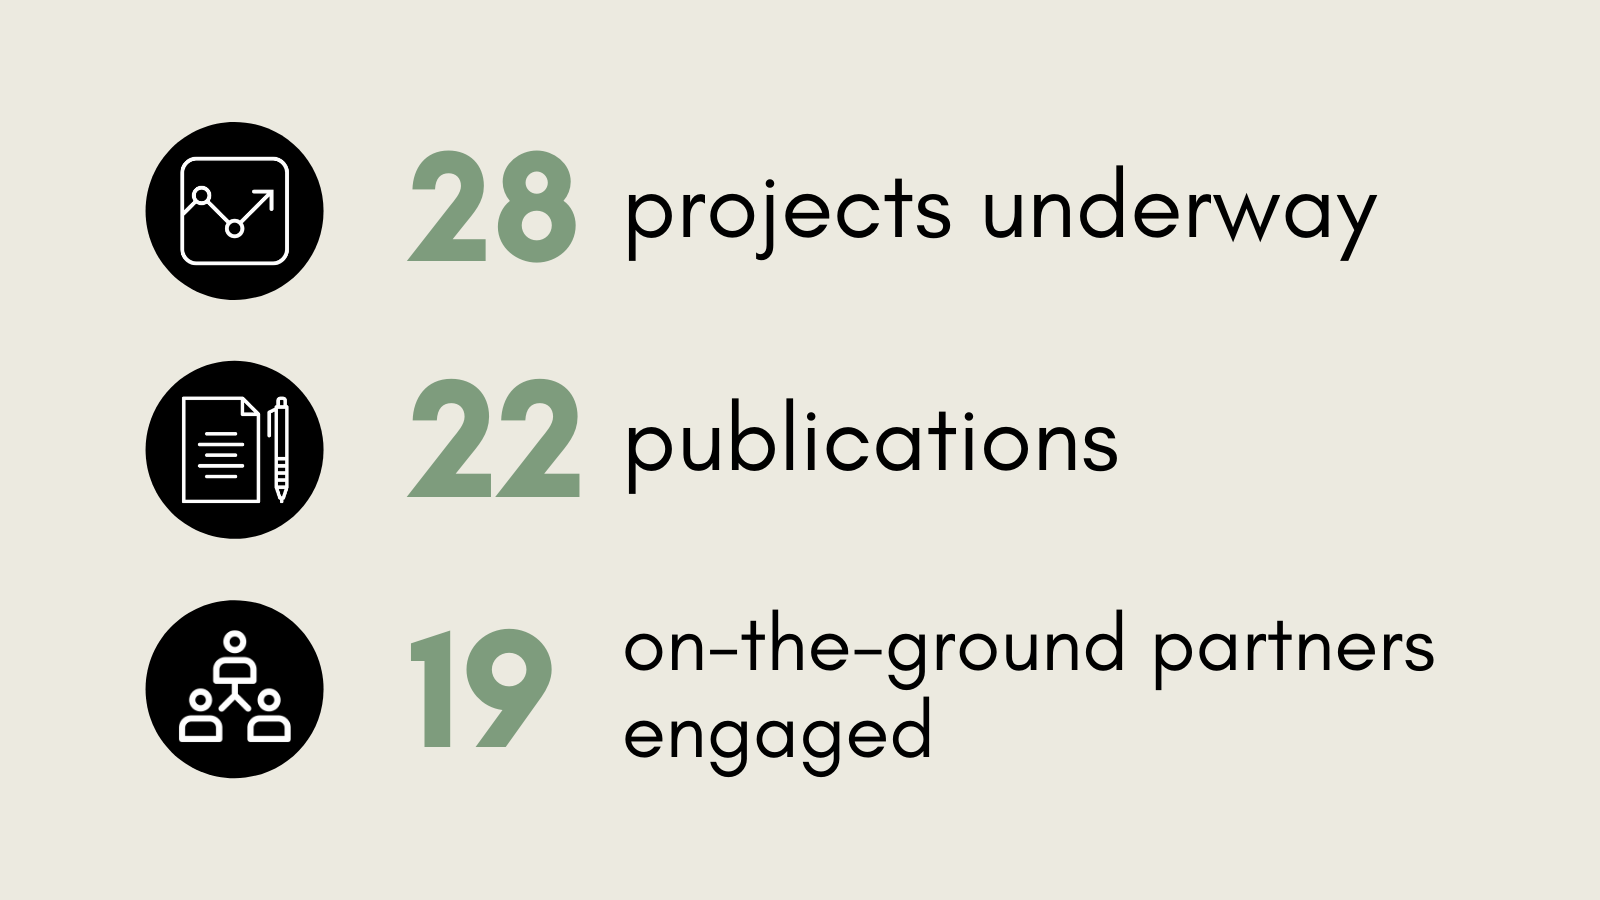 infographic that includes the following statistics: 28 projects underway, 22 publications, 19 on-the-ground partners engaged